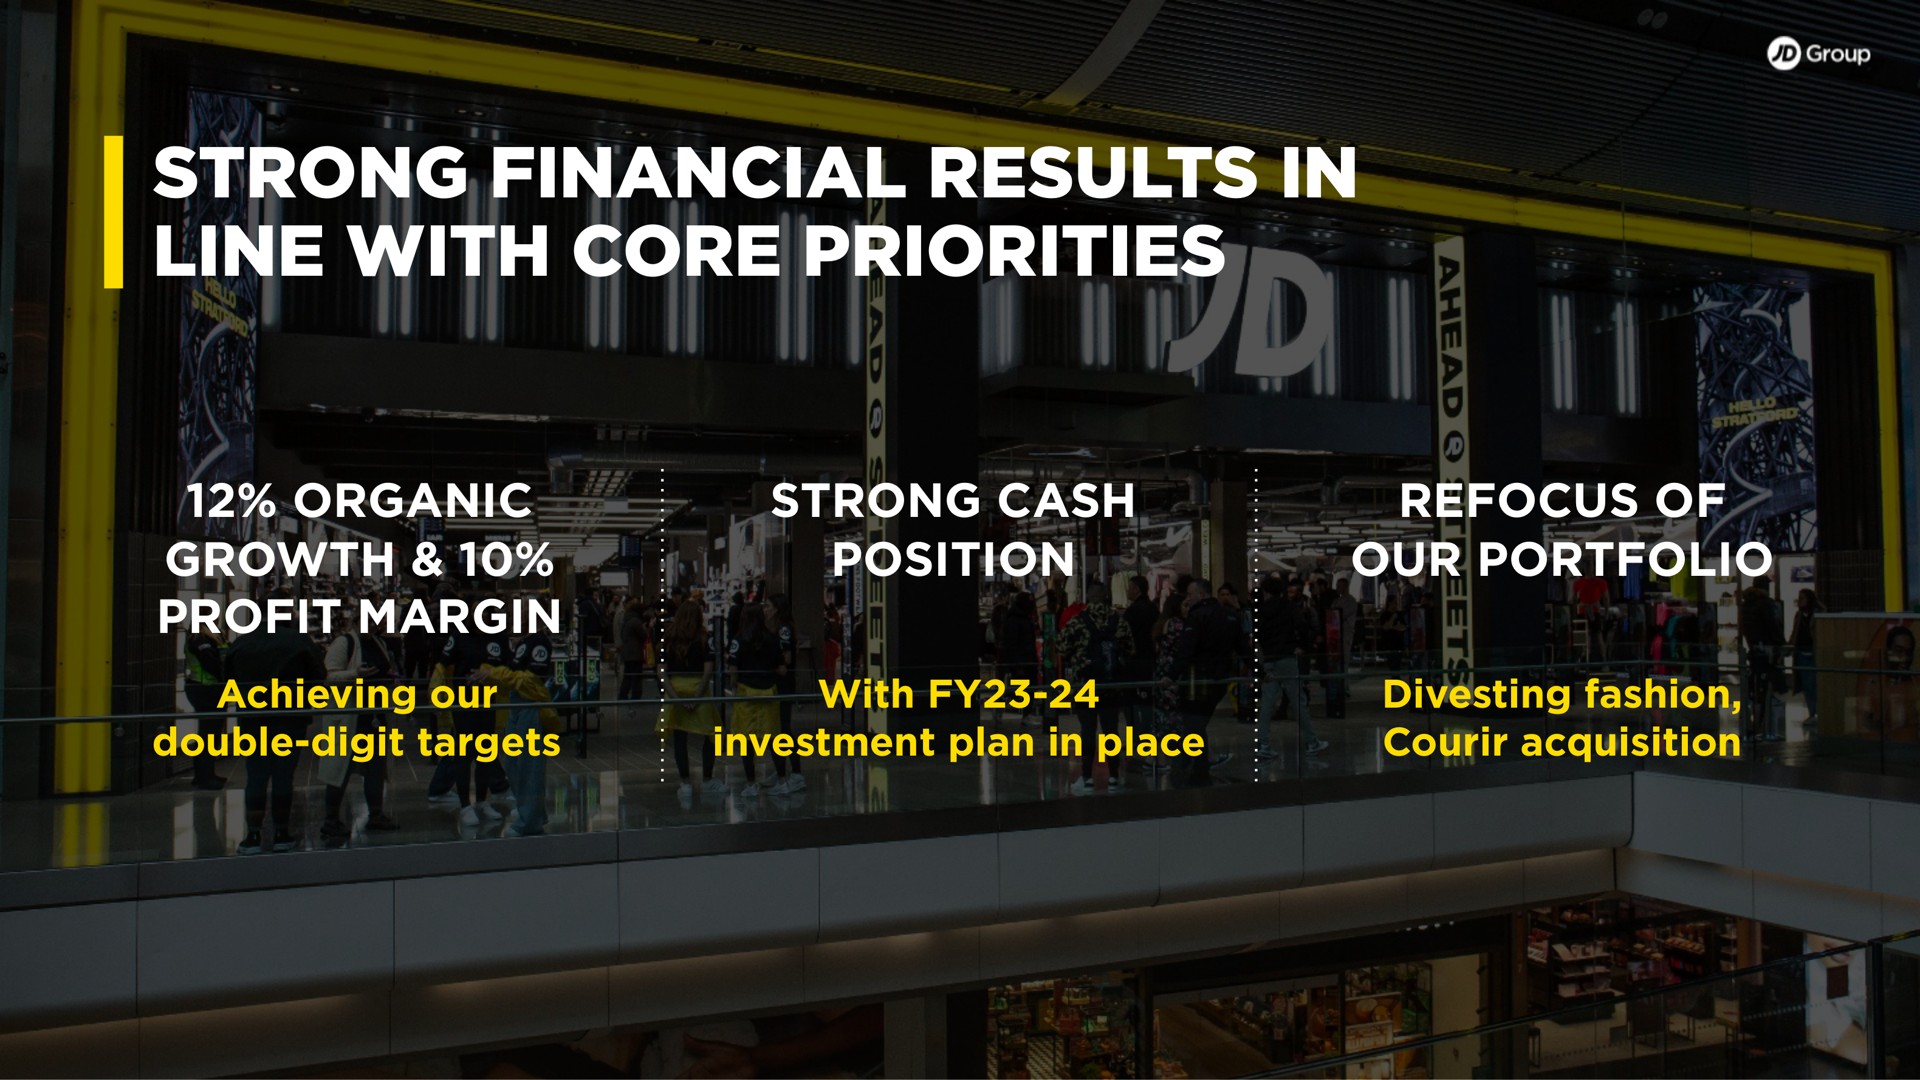 strong financial results in line with core priorities organic growth profit margin strong cash position refocus of our portfolio achieving our double digit targets with investment plan in place divesting fashion acquisition | JD Sports